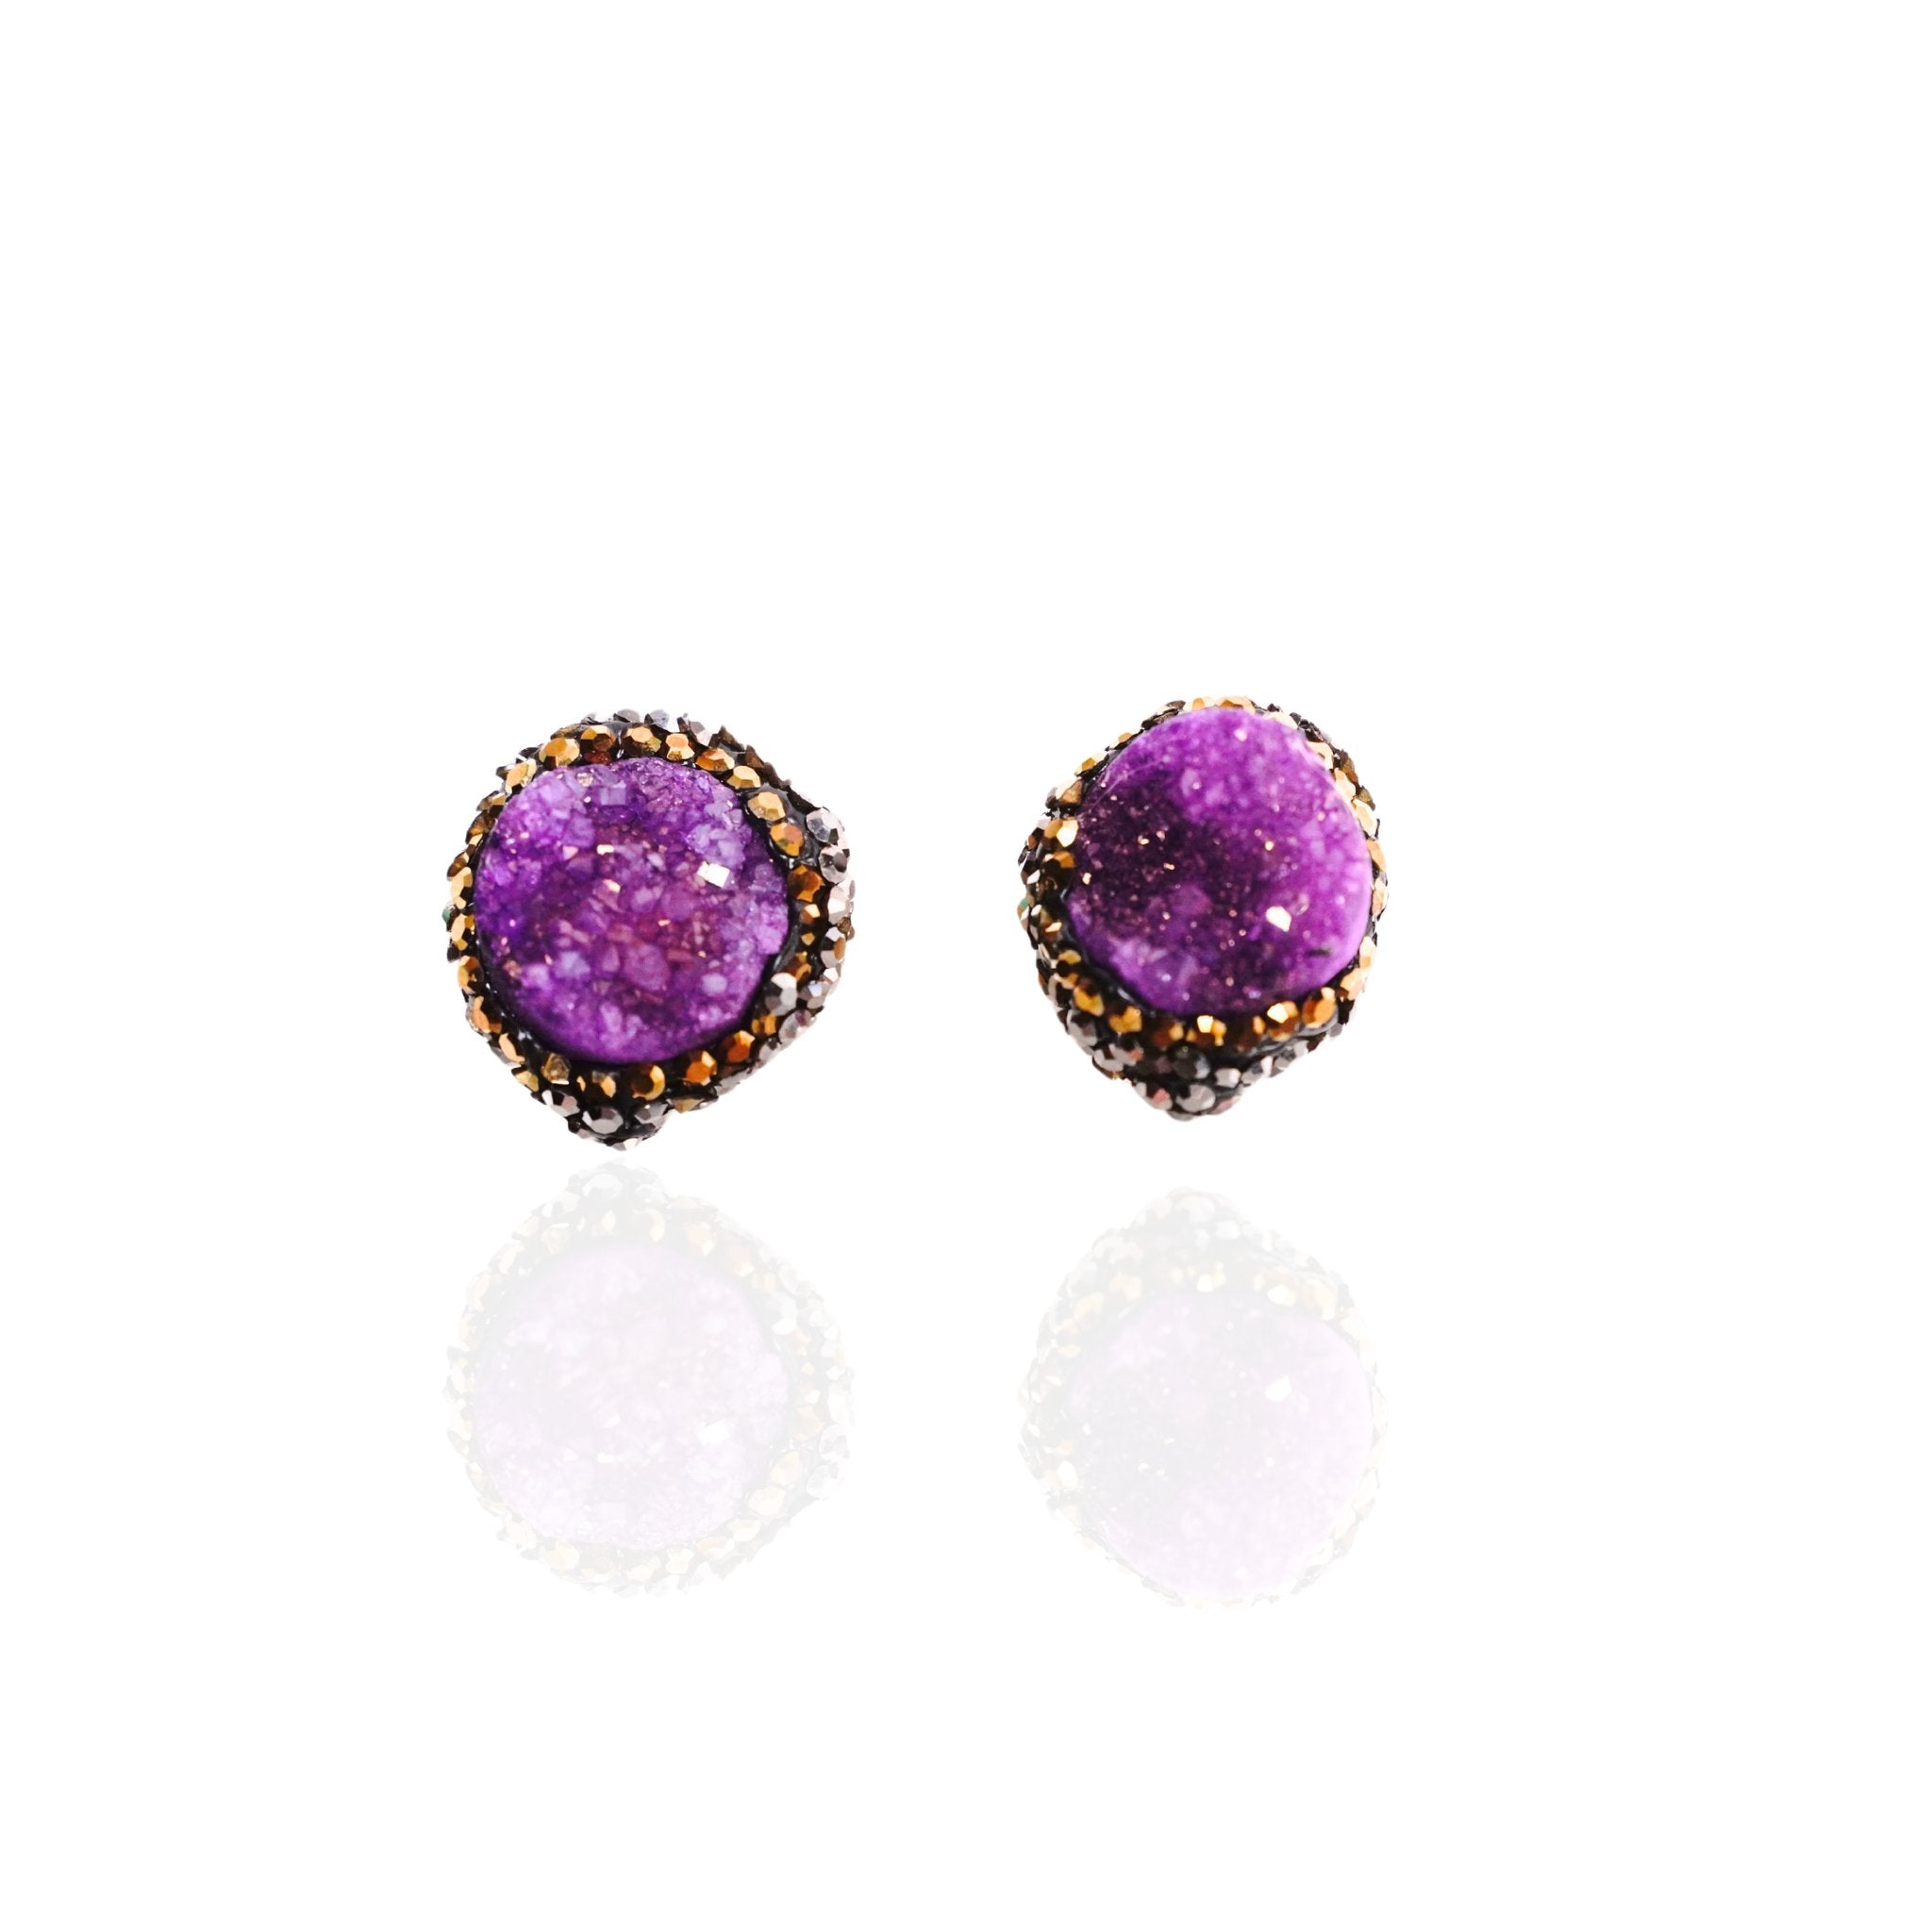 Chrysallis Agate Sparkler Studs - Jade/Amethyst - Sassy Jones beaded jewelry, handcrafted, vibrant colors, intricate designs, timeless elegance, elegant earrings, glass beads, gemstones, natural elements, sophistication, special occasions, casual wear, thoughtful gifts, artistry, fashion, Handcrafted jewelry, Playful design, Elegant craftsmanship, Fashion accessory, birthday jewelry, wedding jewelry, bridal jewelry